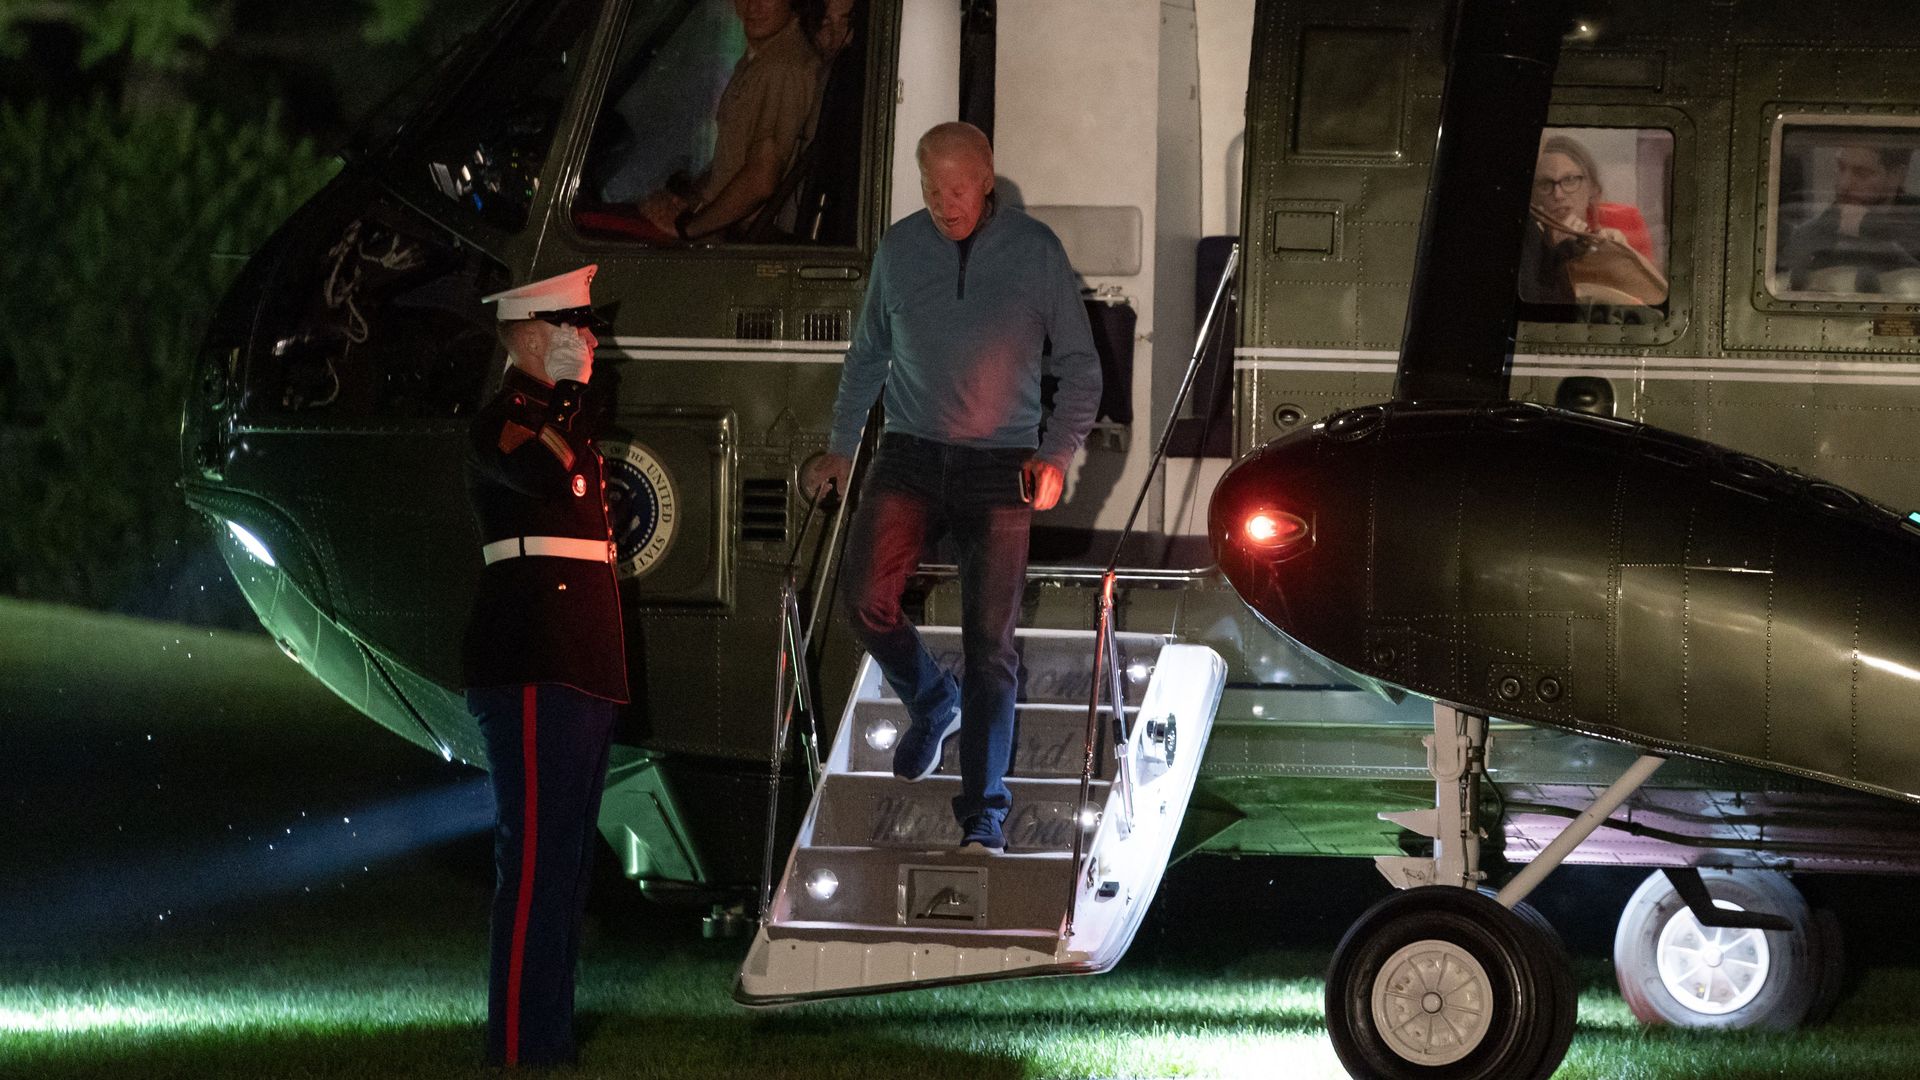 President Biden arrives on the White House South Lawn aboard Marine One early Tuesday after visiting India and Vietnam.